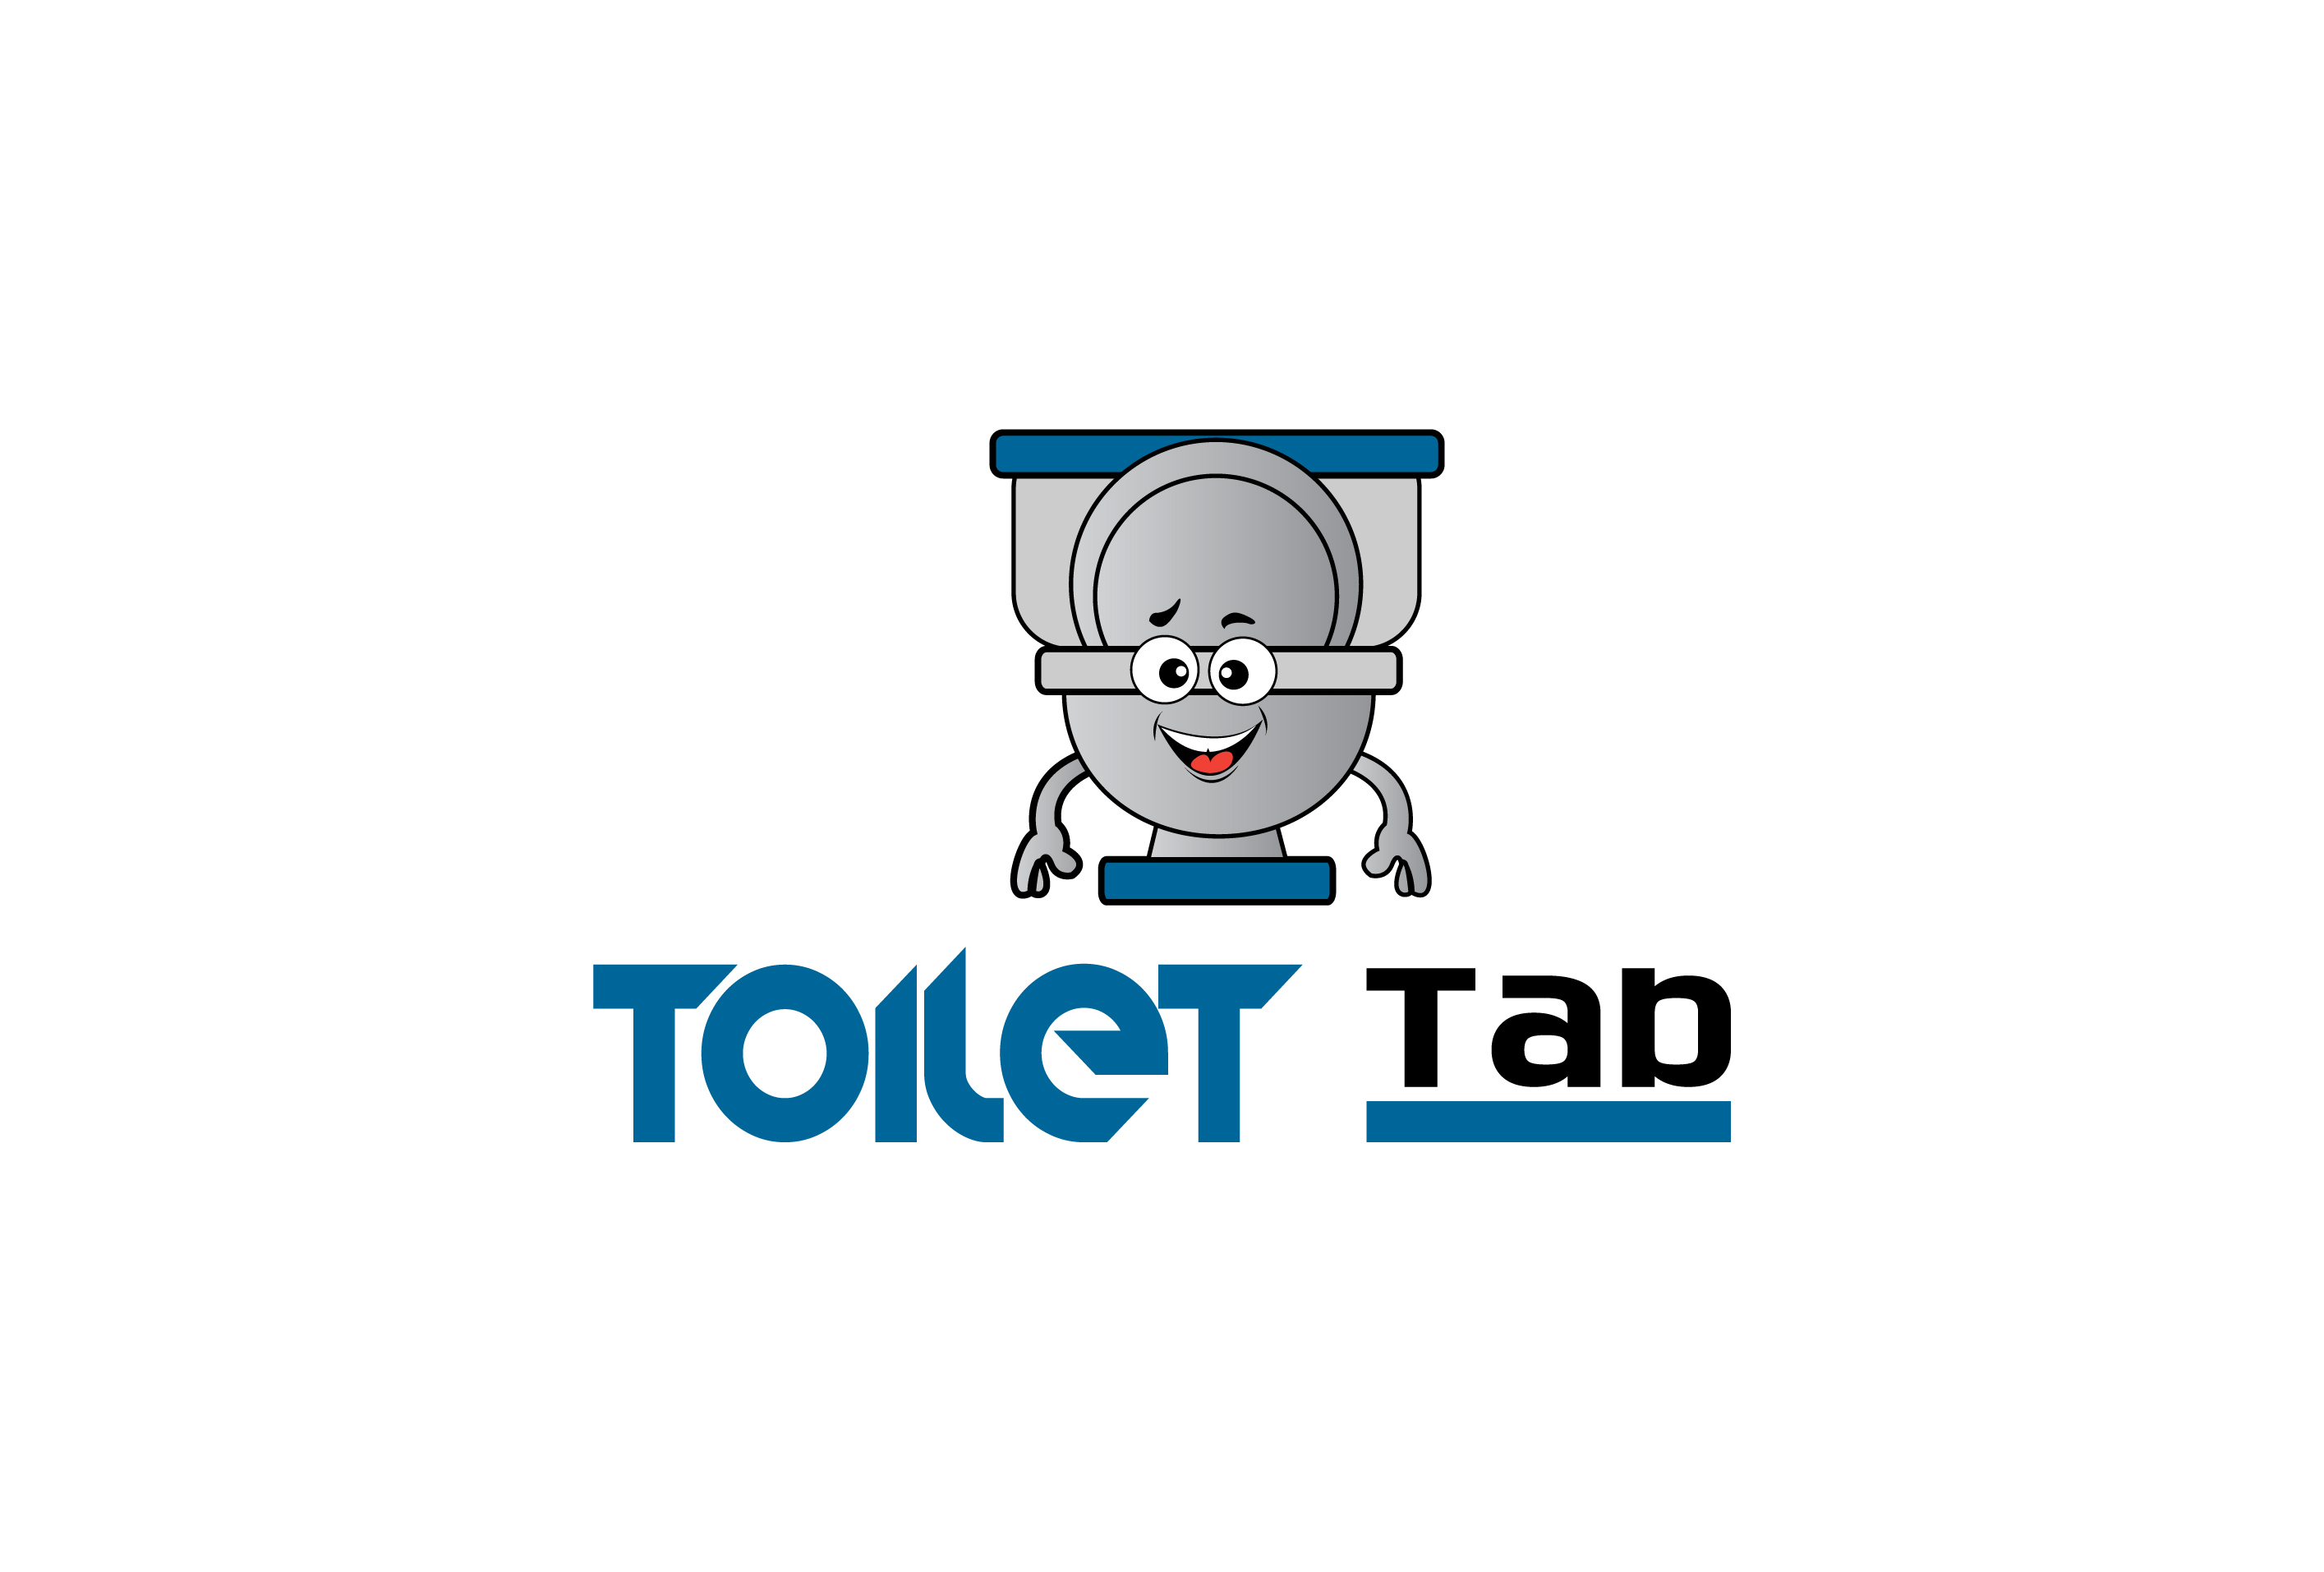 The Toilet Tab will keep you safe!